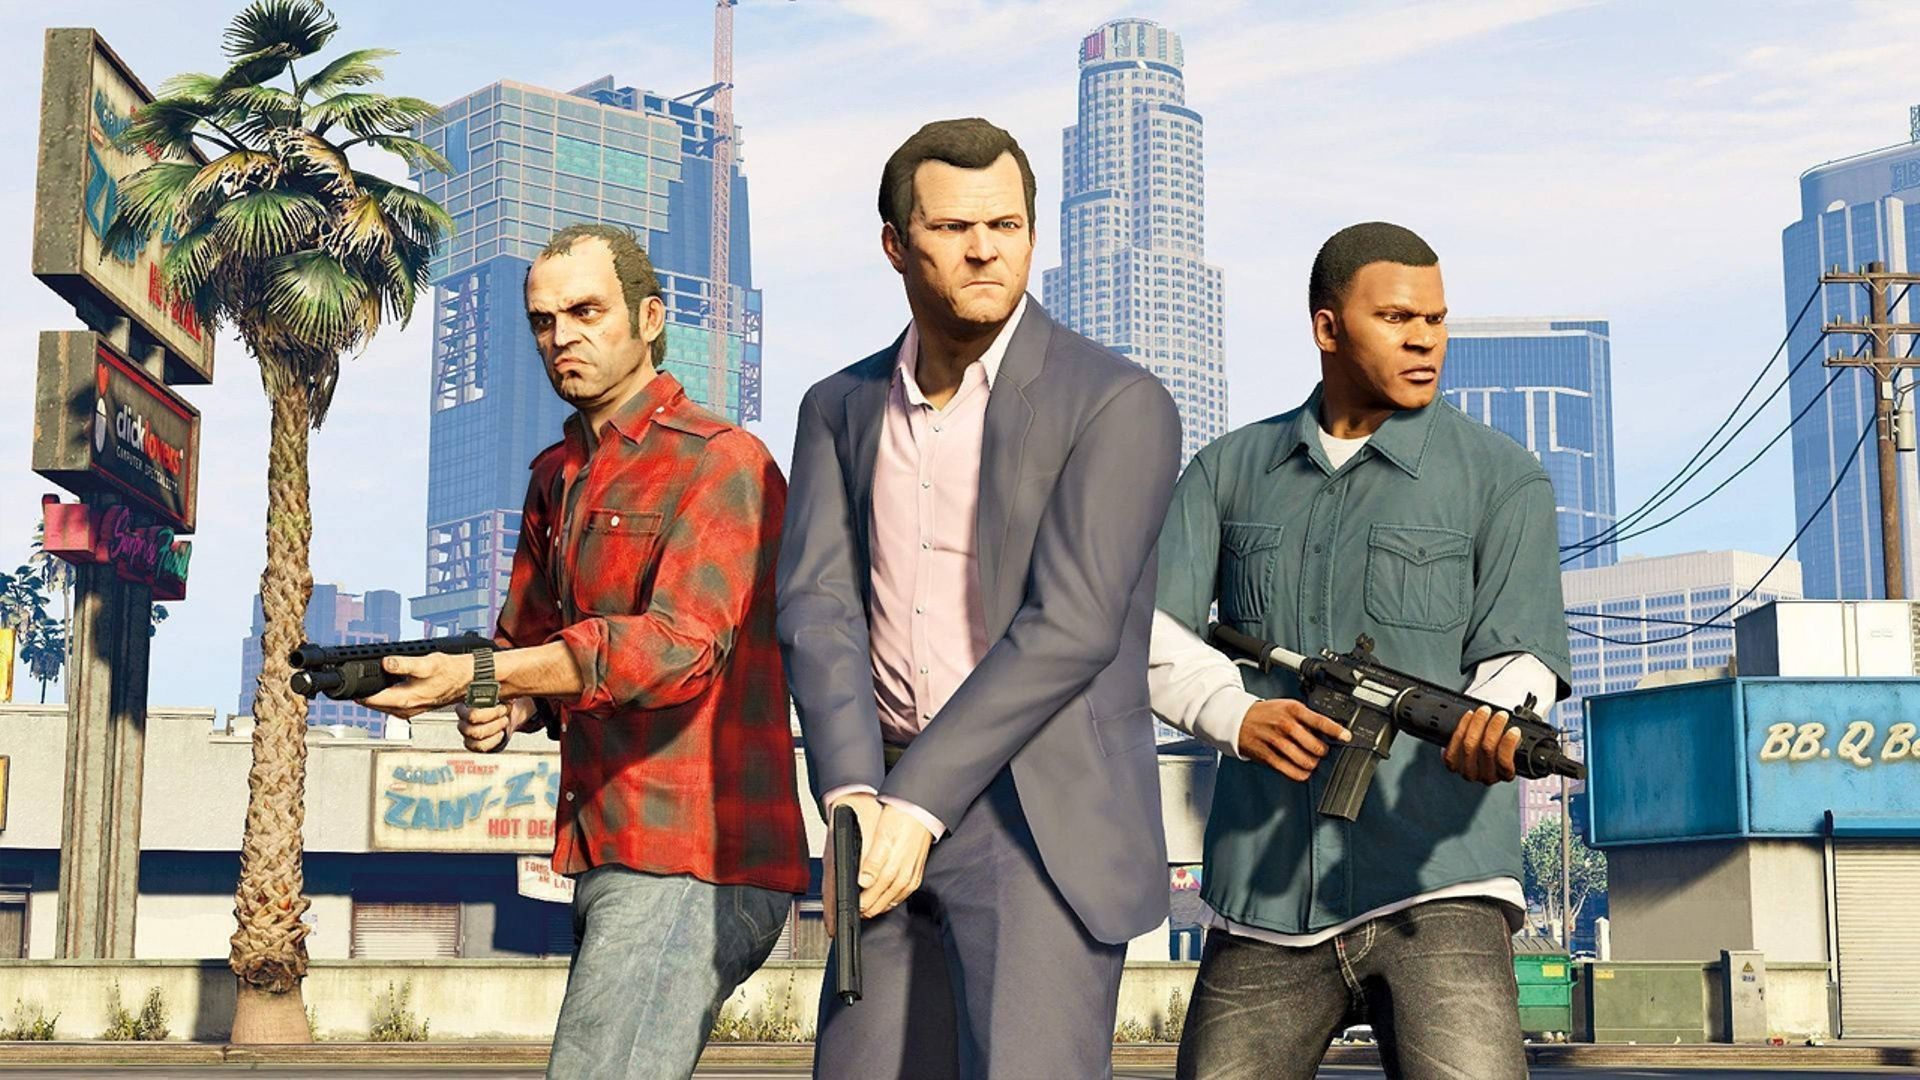 Stephen Totilo on X: “i am looking to negotiate a deal” GTA VI leaker says  they've woken up to thousands of messages and are calling on people from  Rockstar/Take Two to contact